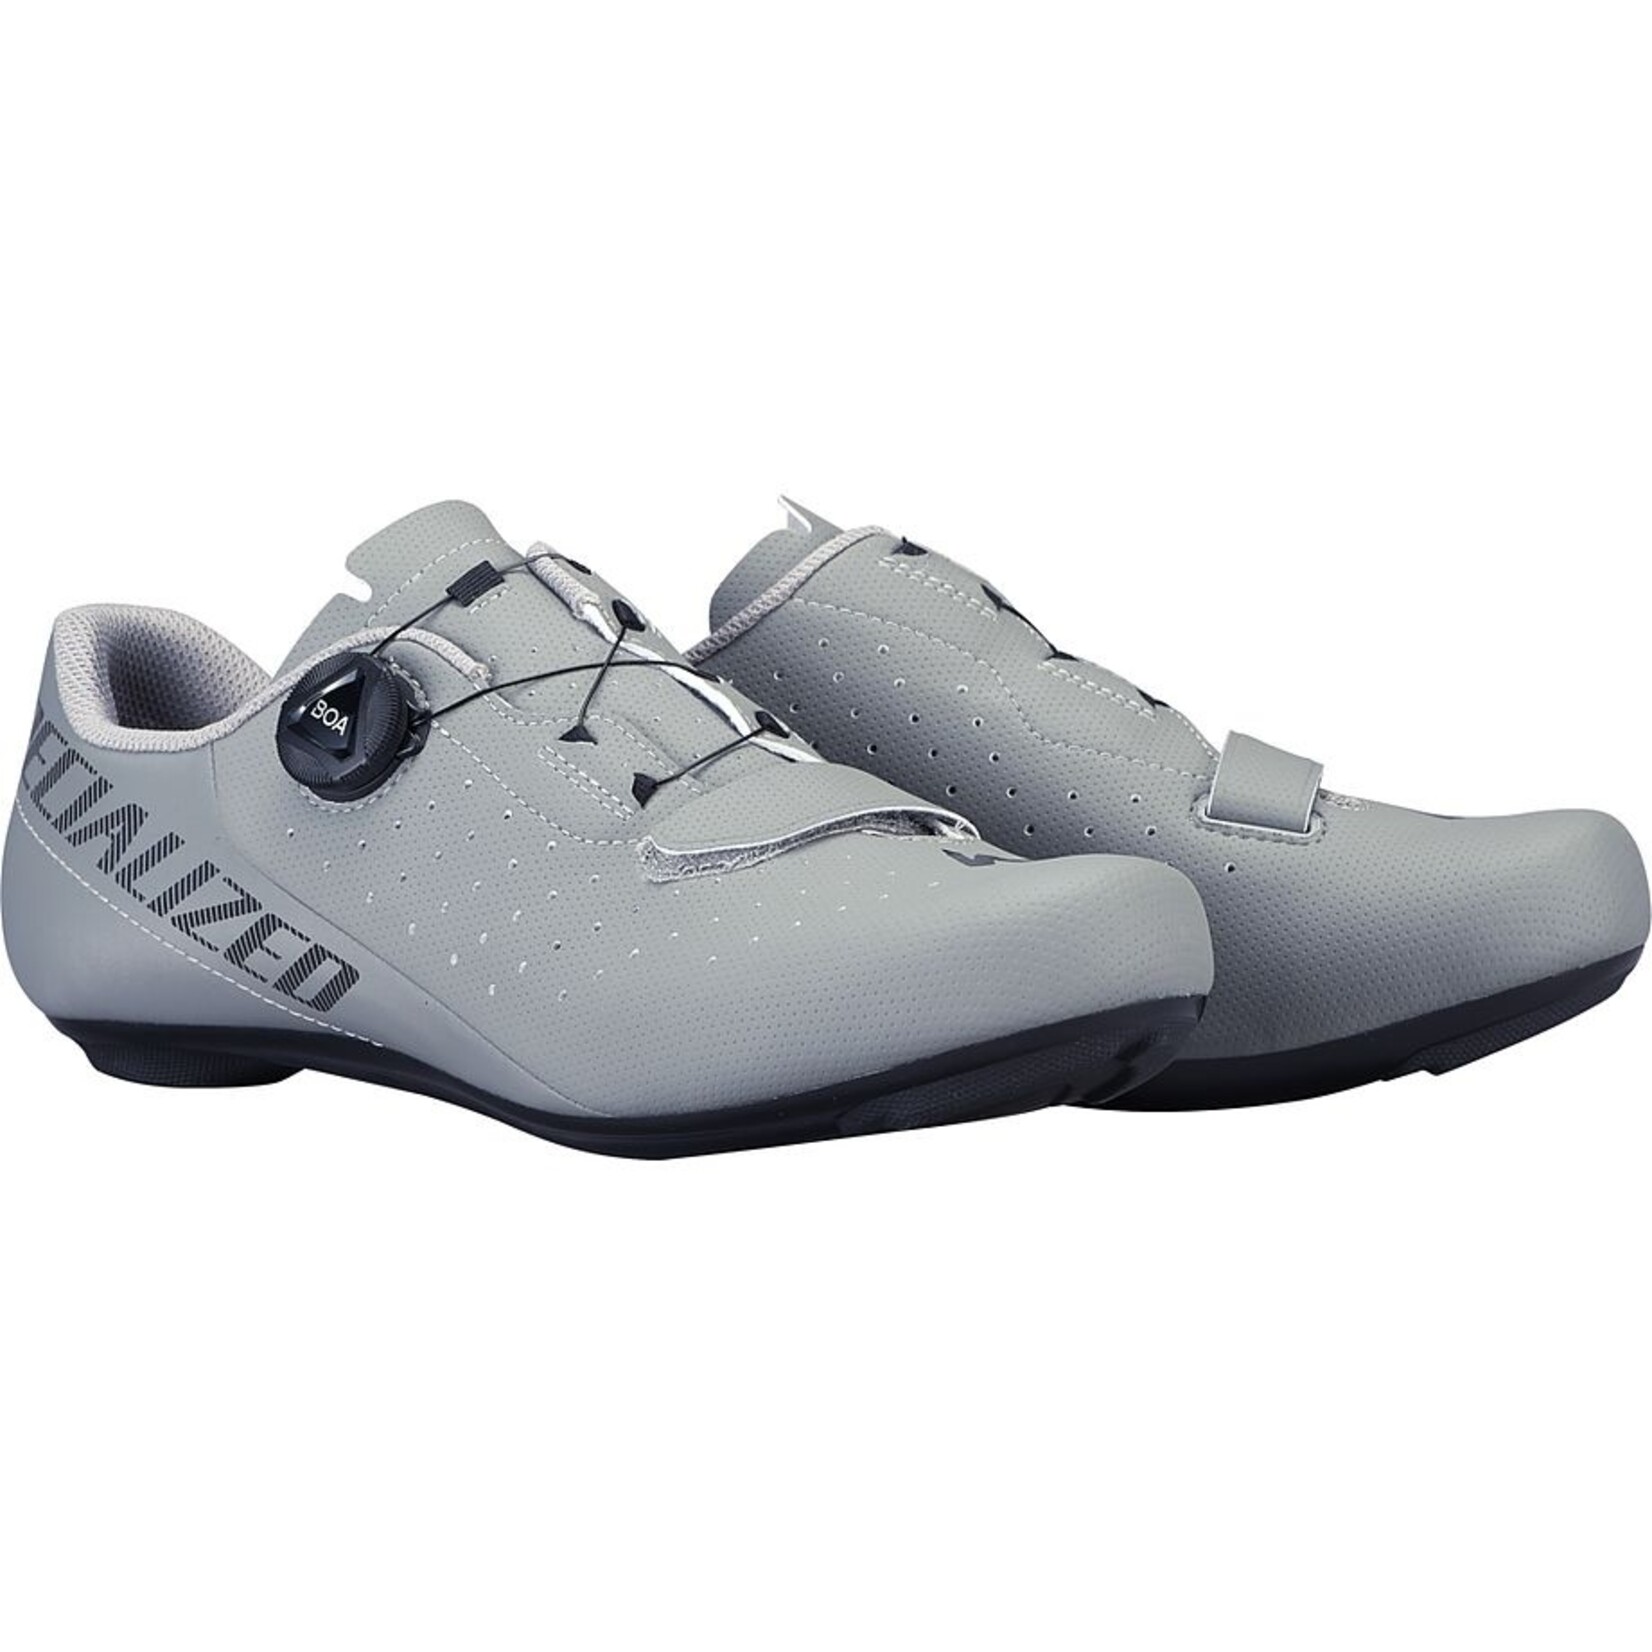 Specialized Torch 1.0 Road Shoes in SlateCool Grey